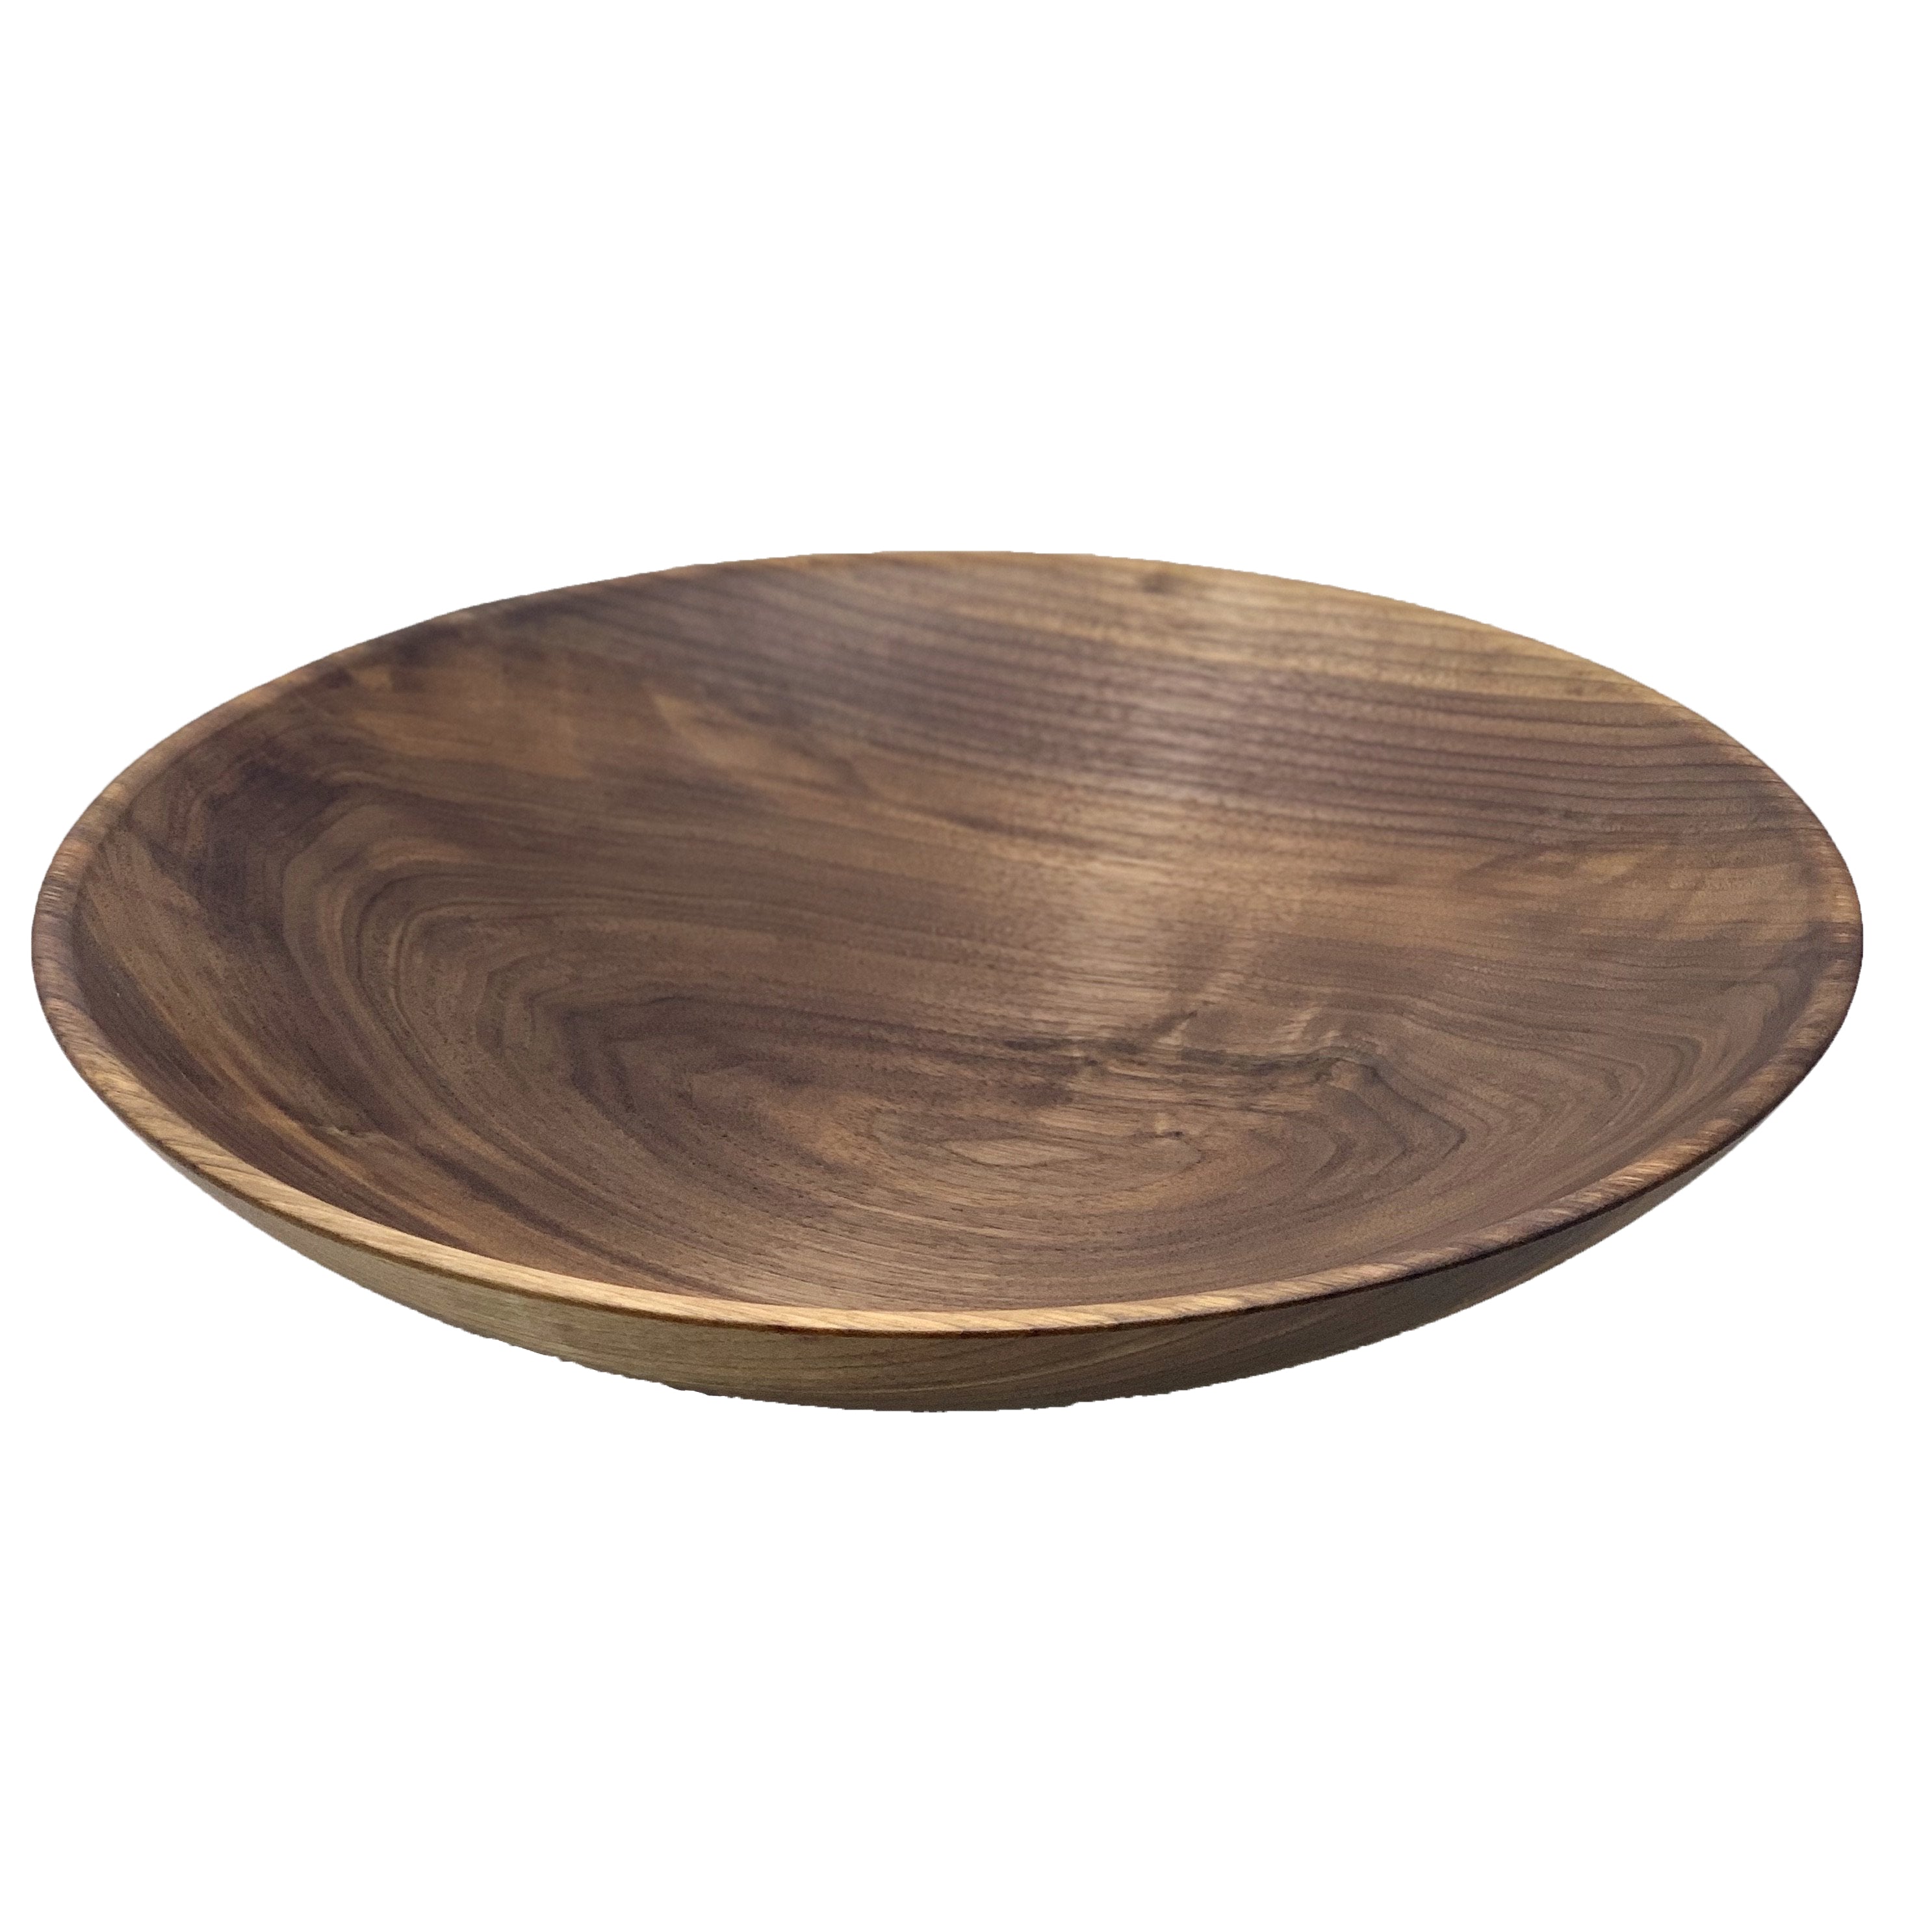 Hardwood Shadow Serving Dish: LIMITED EDITION - Andrew Pearce Bowls | walnut / x-large